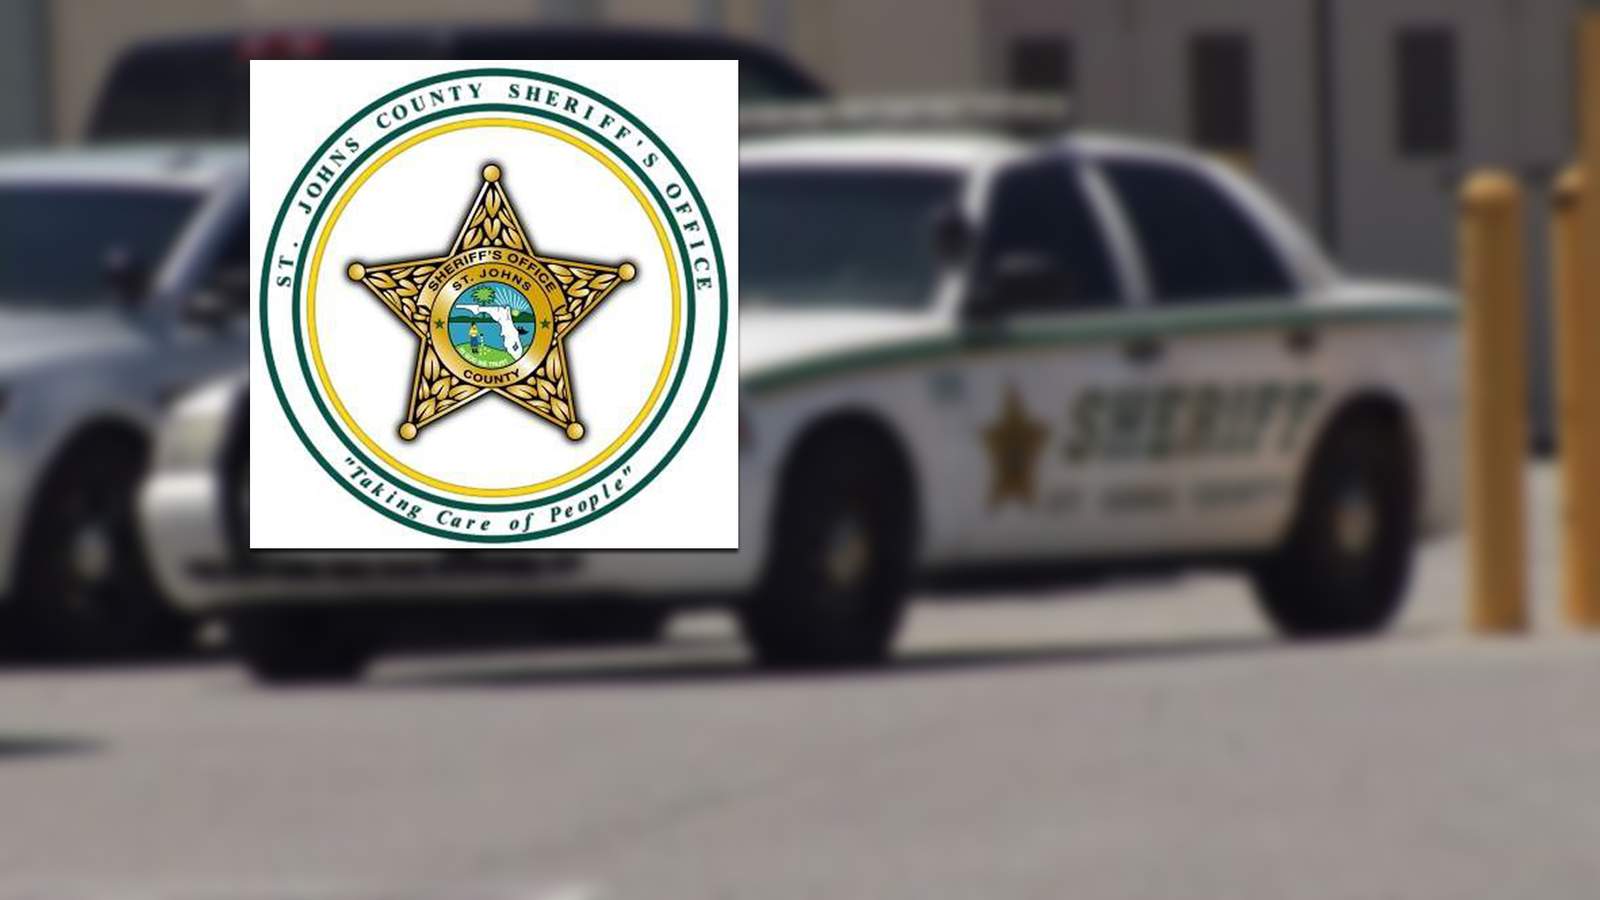 Deputy hit by car while directing traffic in St. Johns County